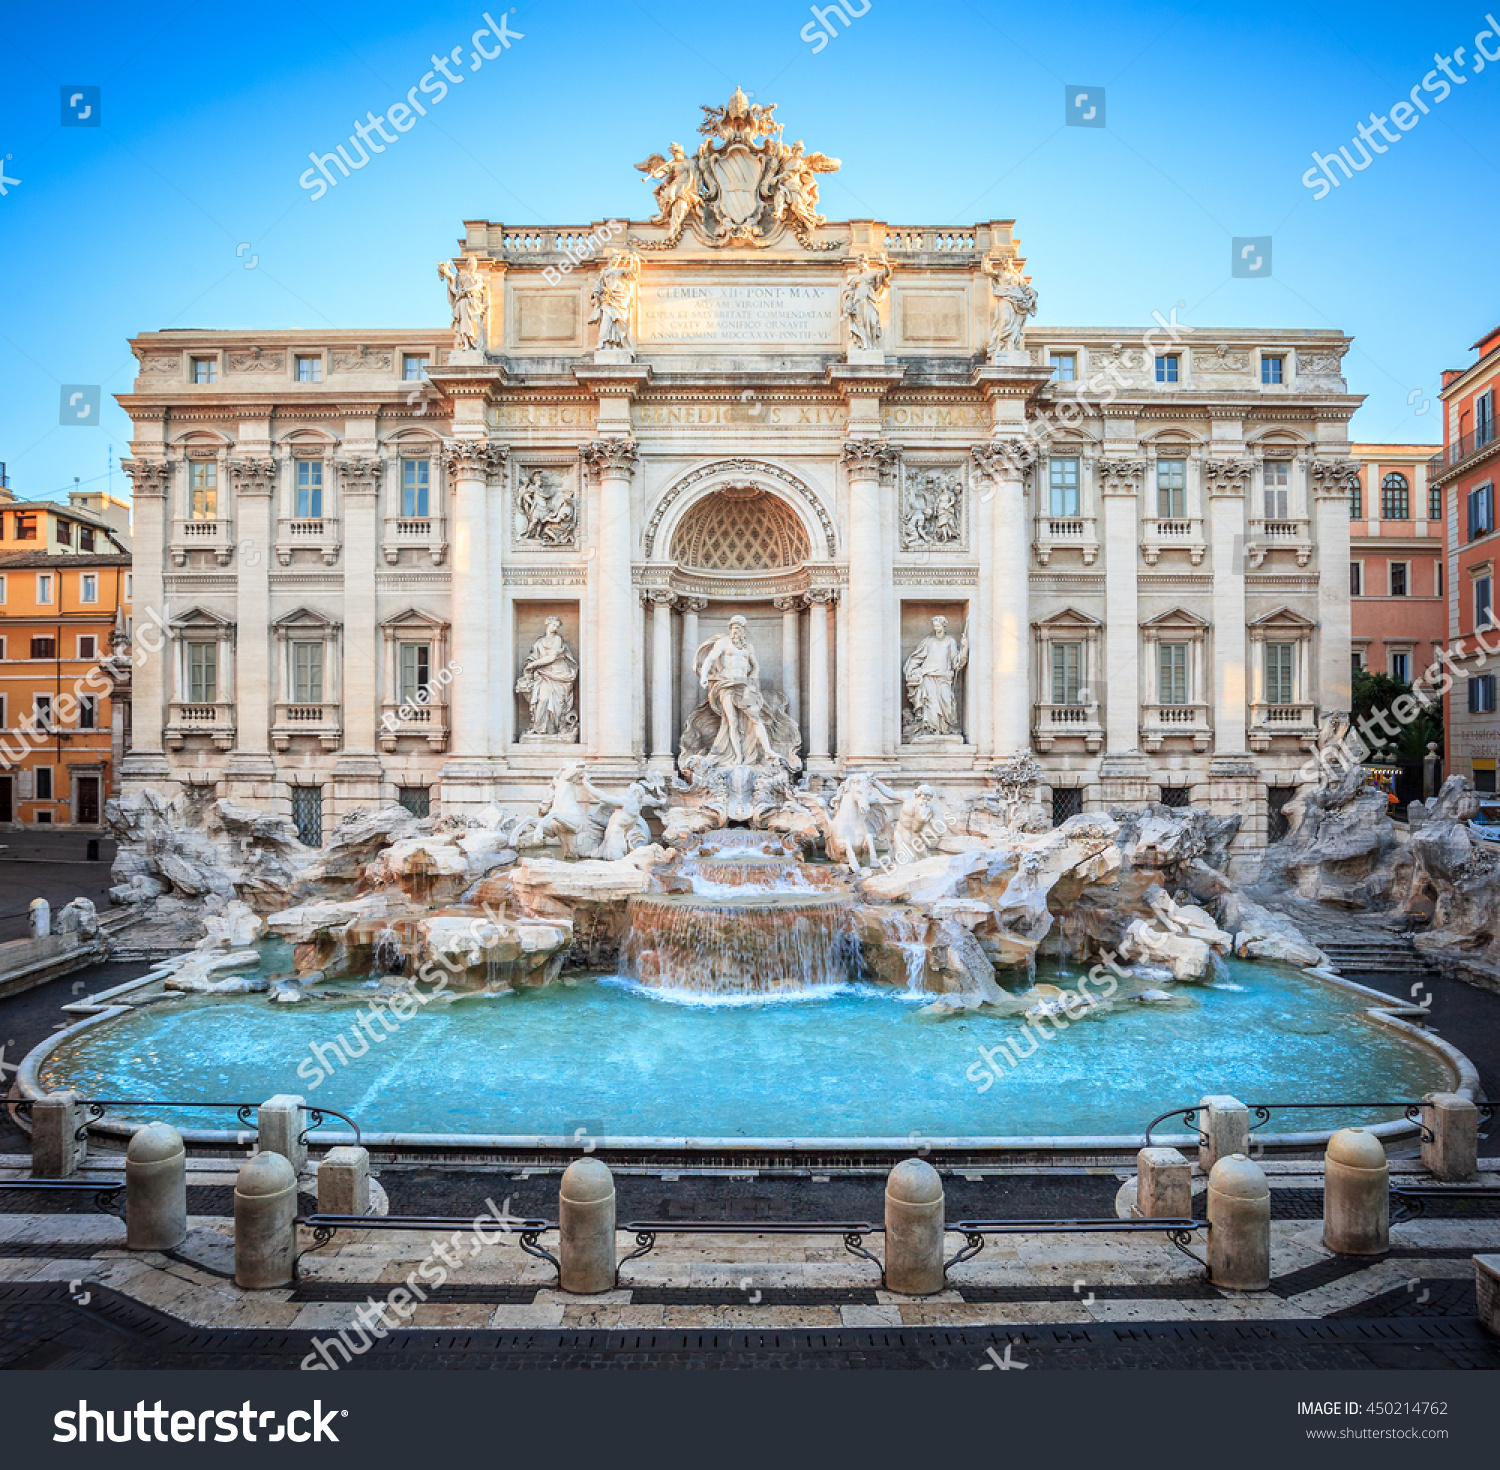 Trevi fountain at sunrise, Rome, Italy. Rome baroque architecture and landmark. Rome Trevi fountain is one of the main attractions of Rome and Italy #450214762